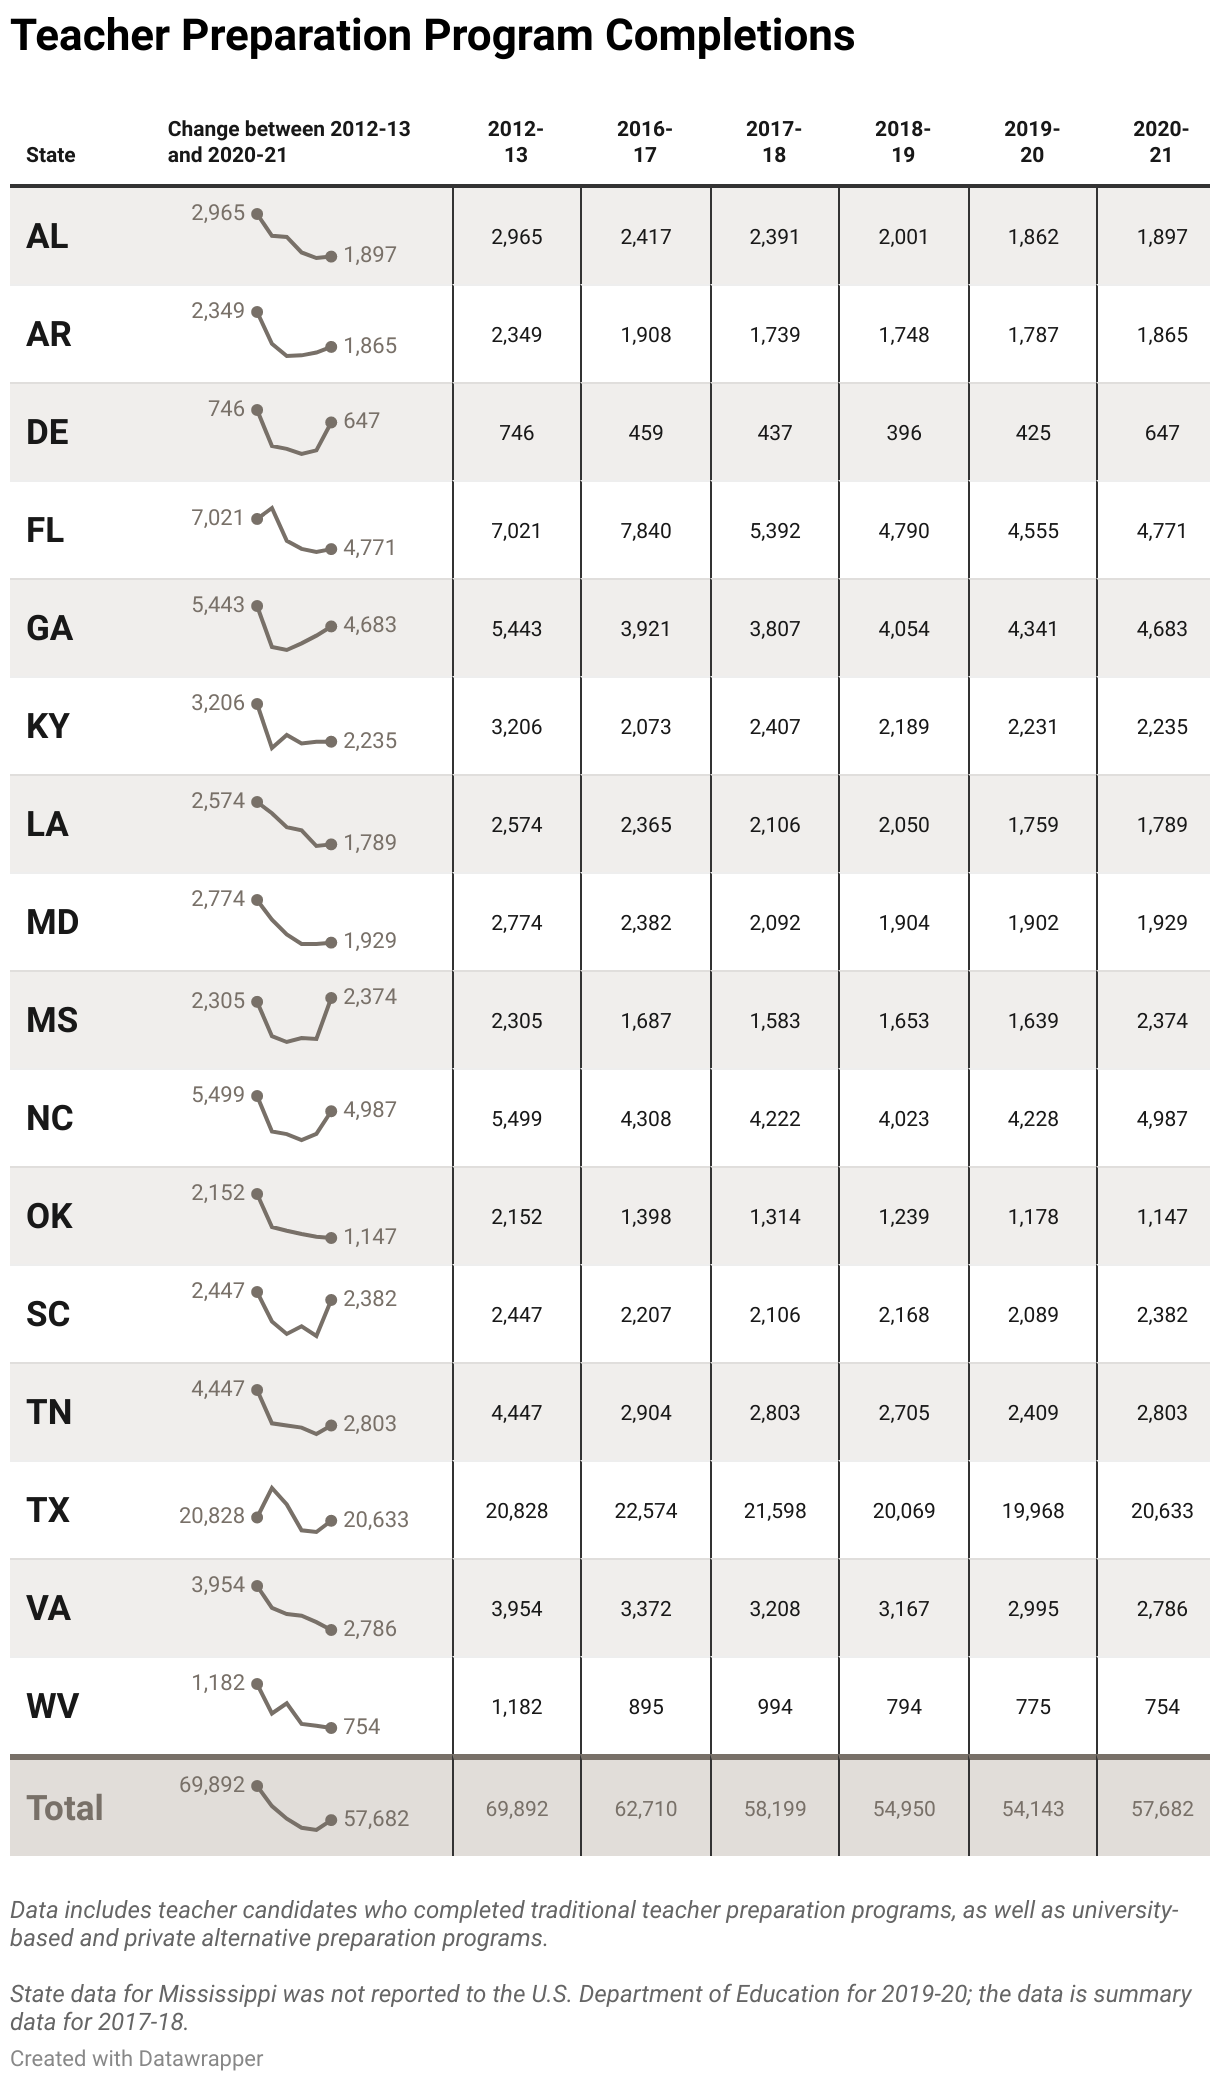 This table shows teacher preparation data in SREB states between 2012-13 and 2020-21. Column and rows show the total number of teacher preparation program completions in each year by state. Small line graphs visually show the change in each state between 202-13 and 2020-21. The last row at the bottom displays total numbers for the region overall. 